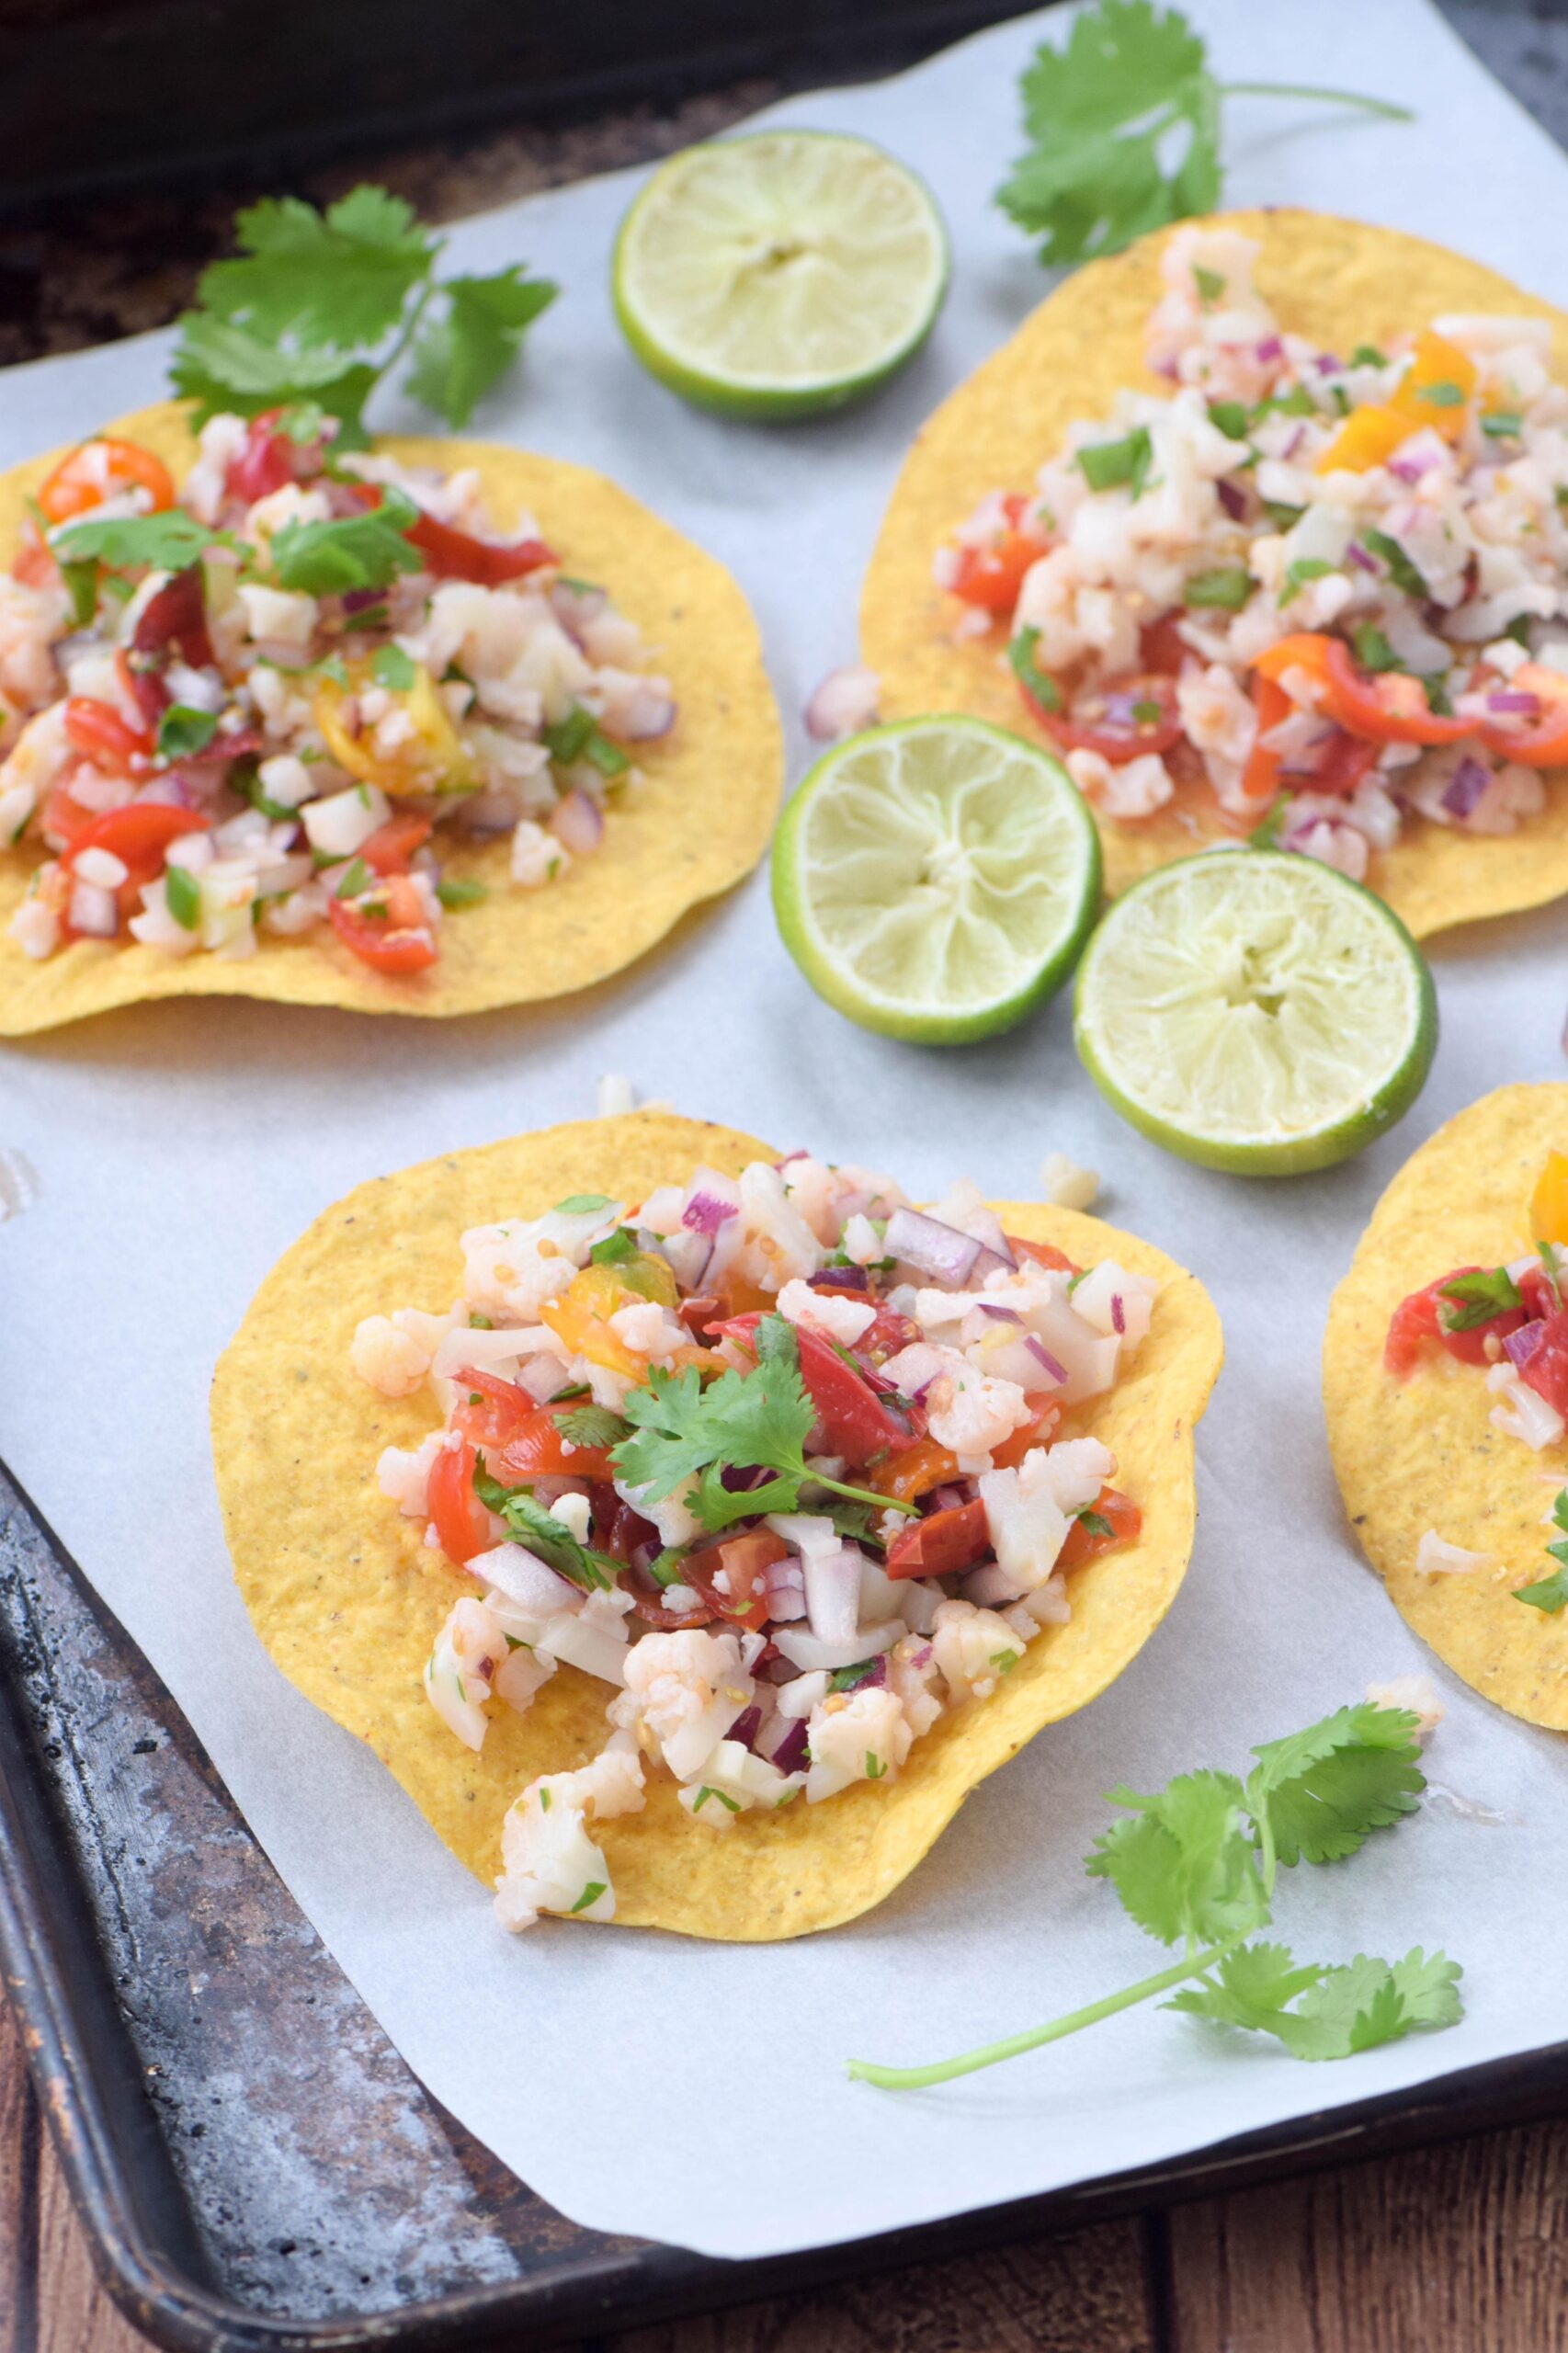  Perfect for outdoor gatherings, this ceviche is light and refreshing.